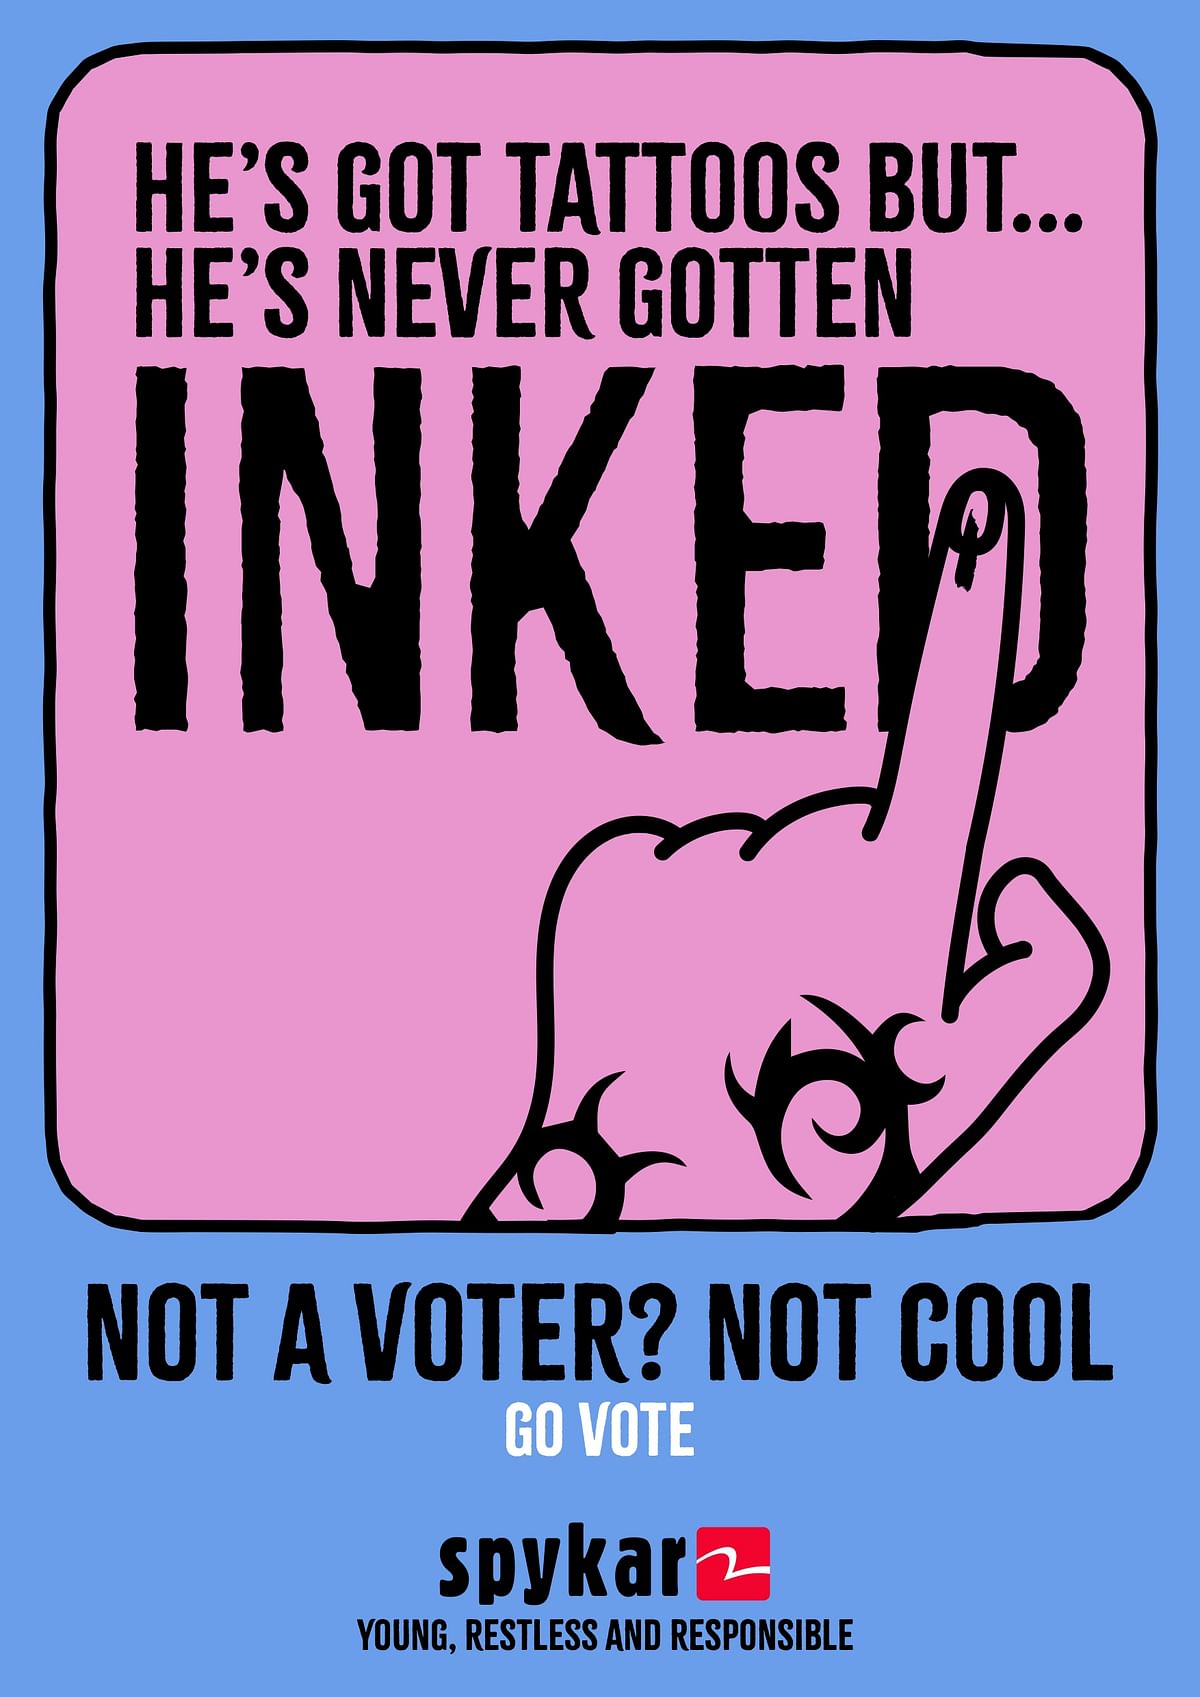 Spykar's election campaign urges young Indians to vote, highlighting that not voting is not cool